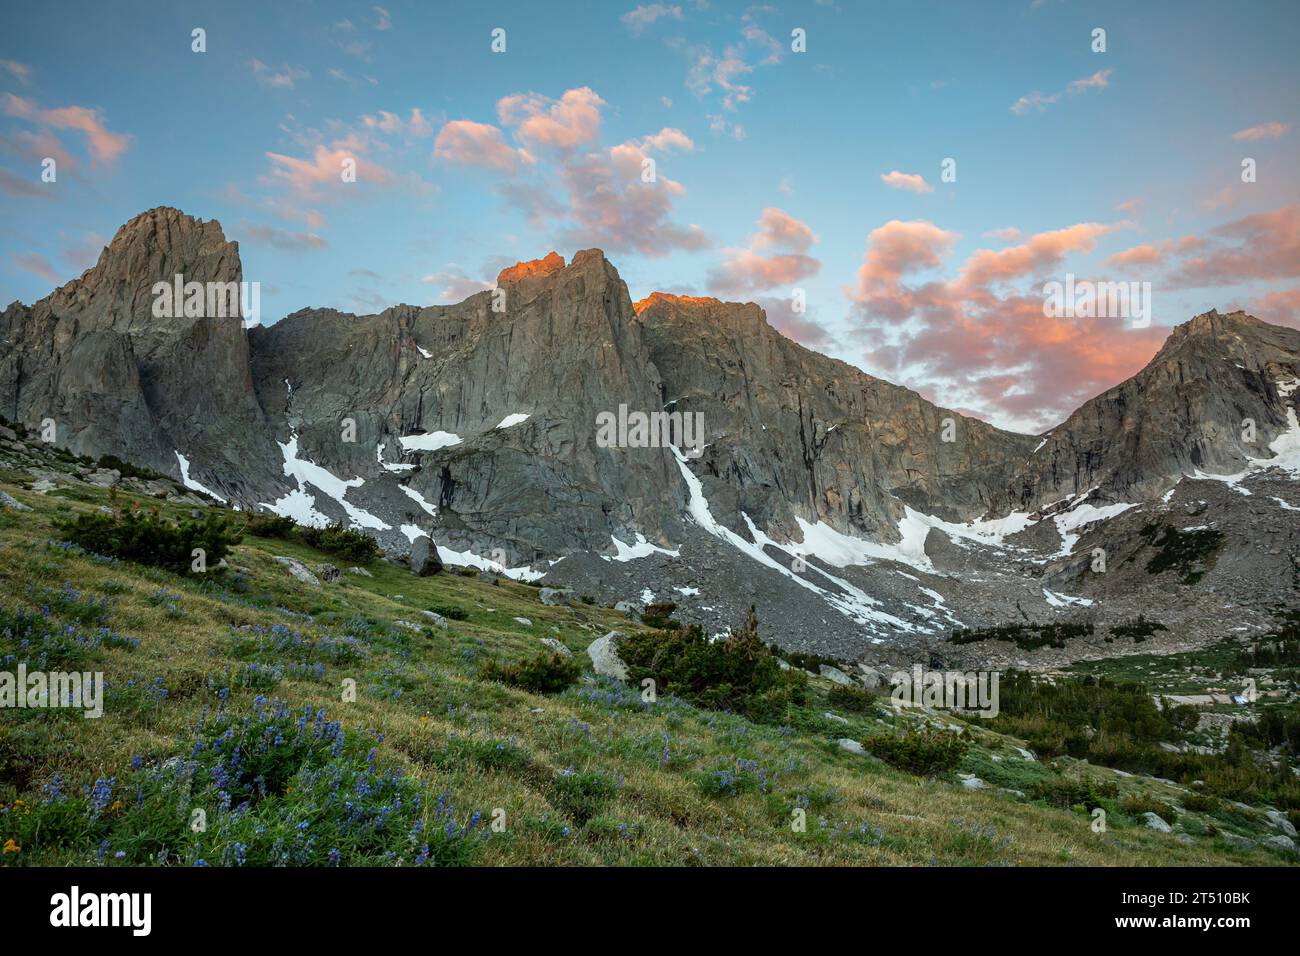 WY05583-00...WYOMING - Warrior, Warbonnet, and Warrior 2 at sunrise in the Cirque of the Towers in the Popo Agie Wilderness area. Stock Photo